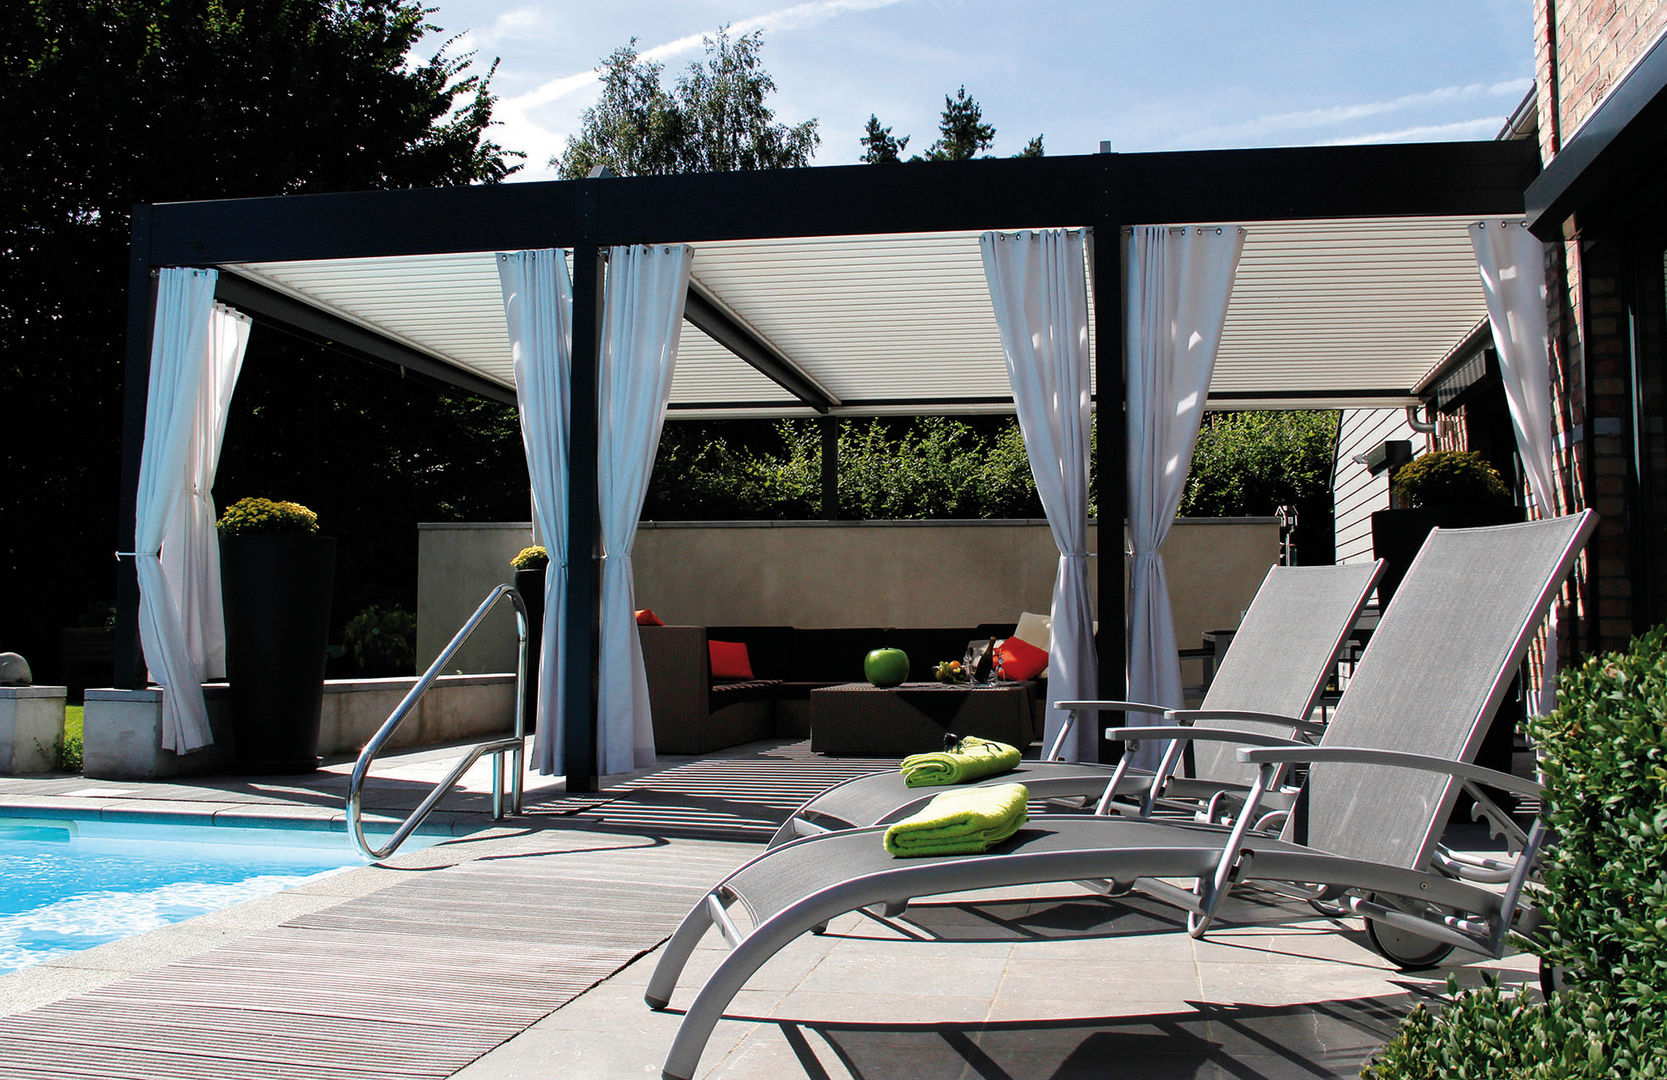 The BIOCLIMATIC Pergola by SOLISYSTEME, SOLISYSTEME SOLISYSTEME Lean-to roof